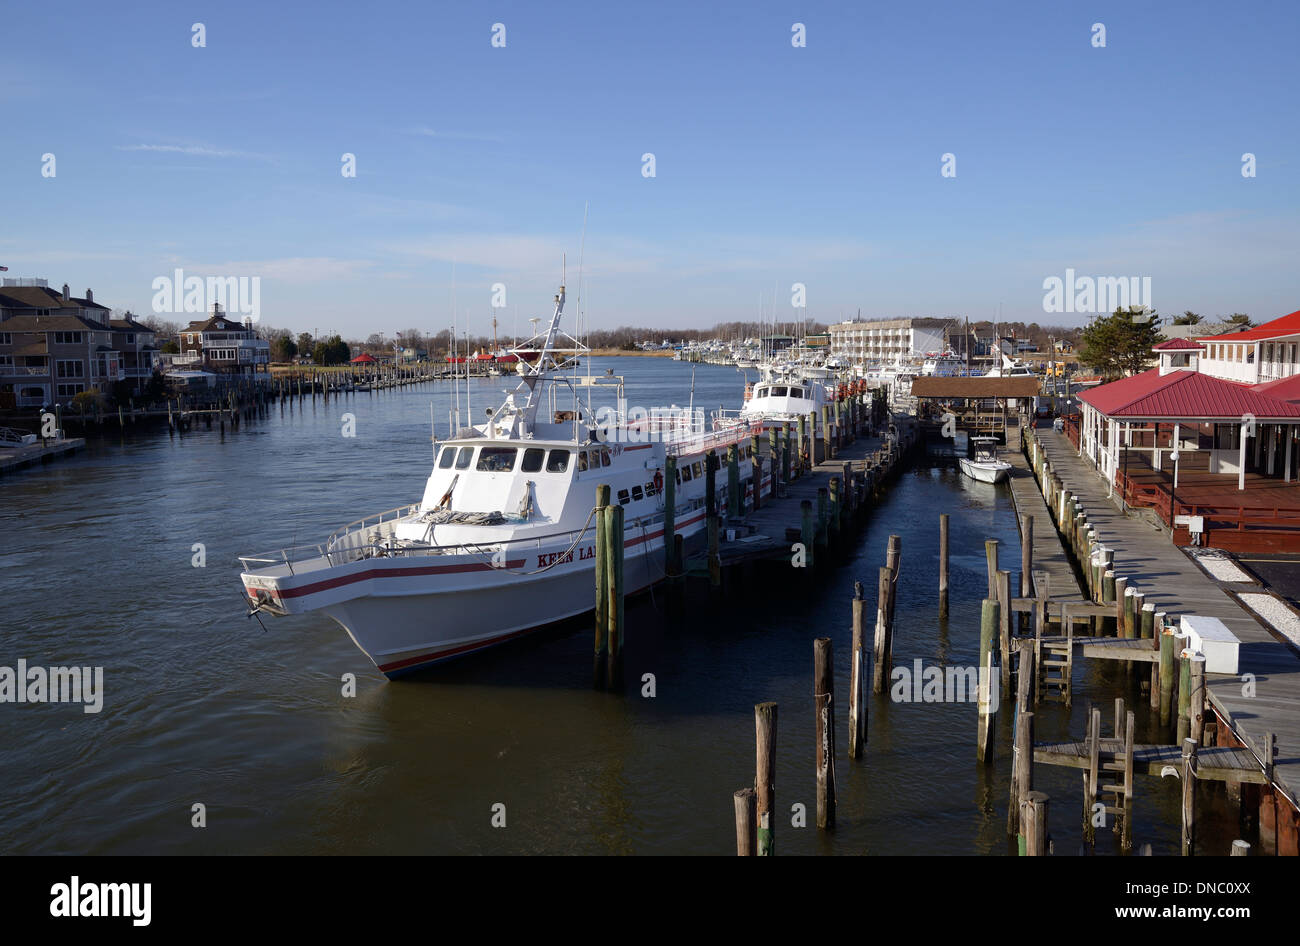 Marina view, Lewes, Delaware USA with white charter boats at the lined up along the dock. Stock Photo